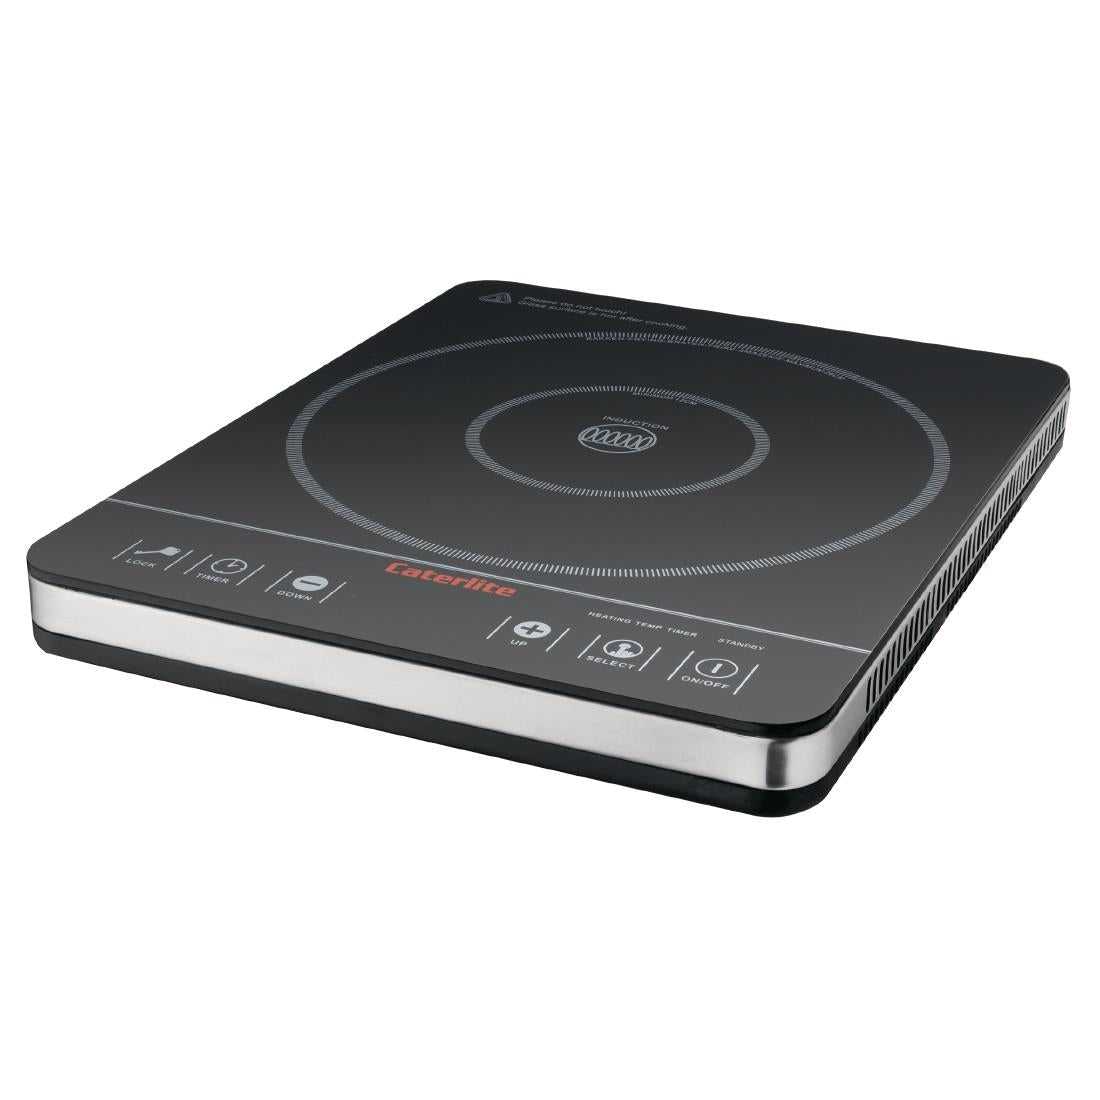 Caterlite Induction Hob 2000W JD Catering Equipment Solutions Ltd